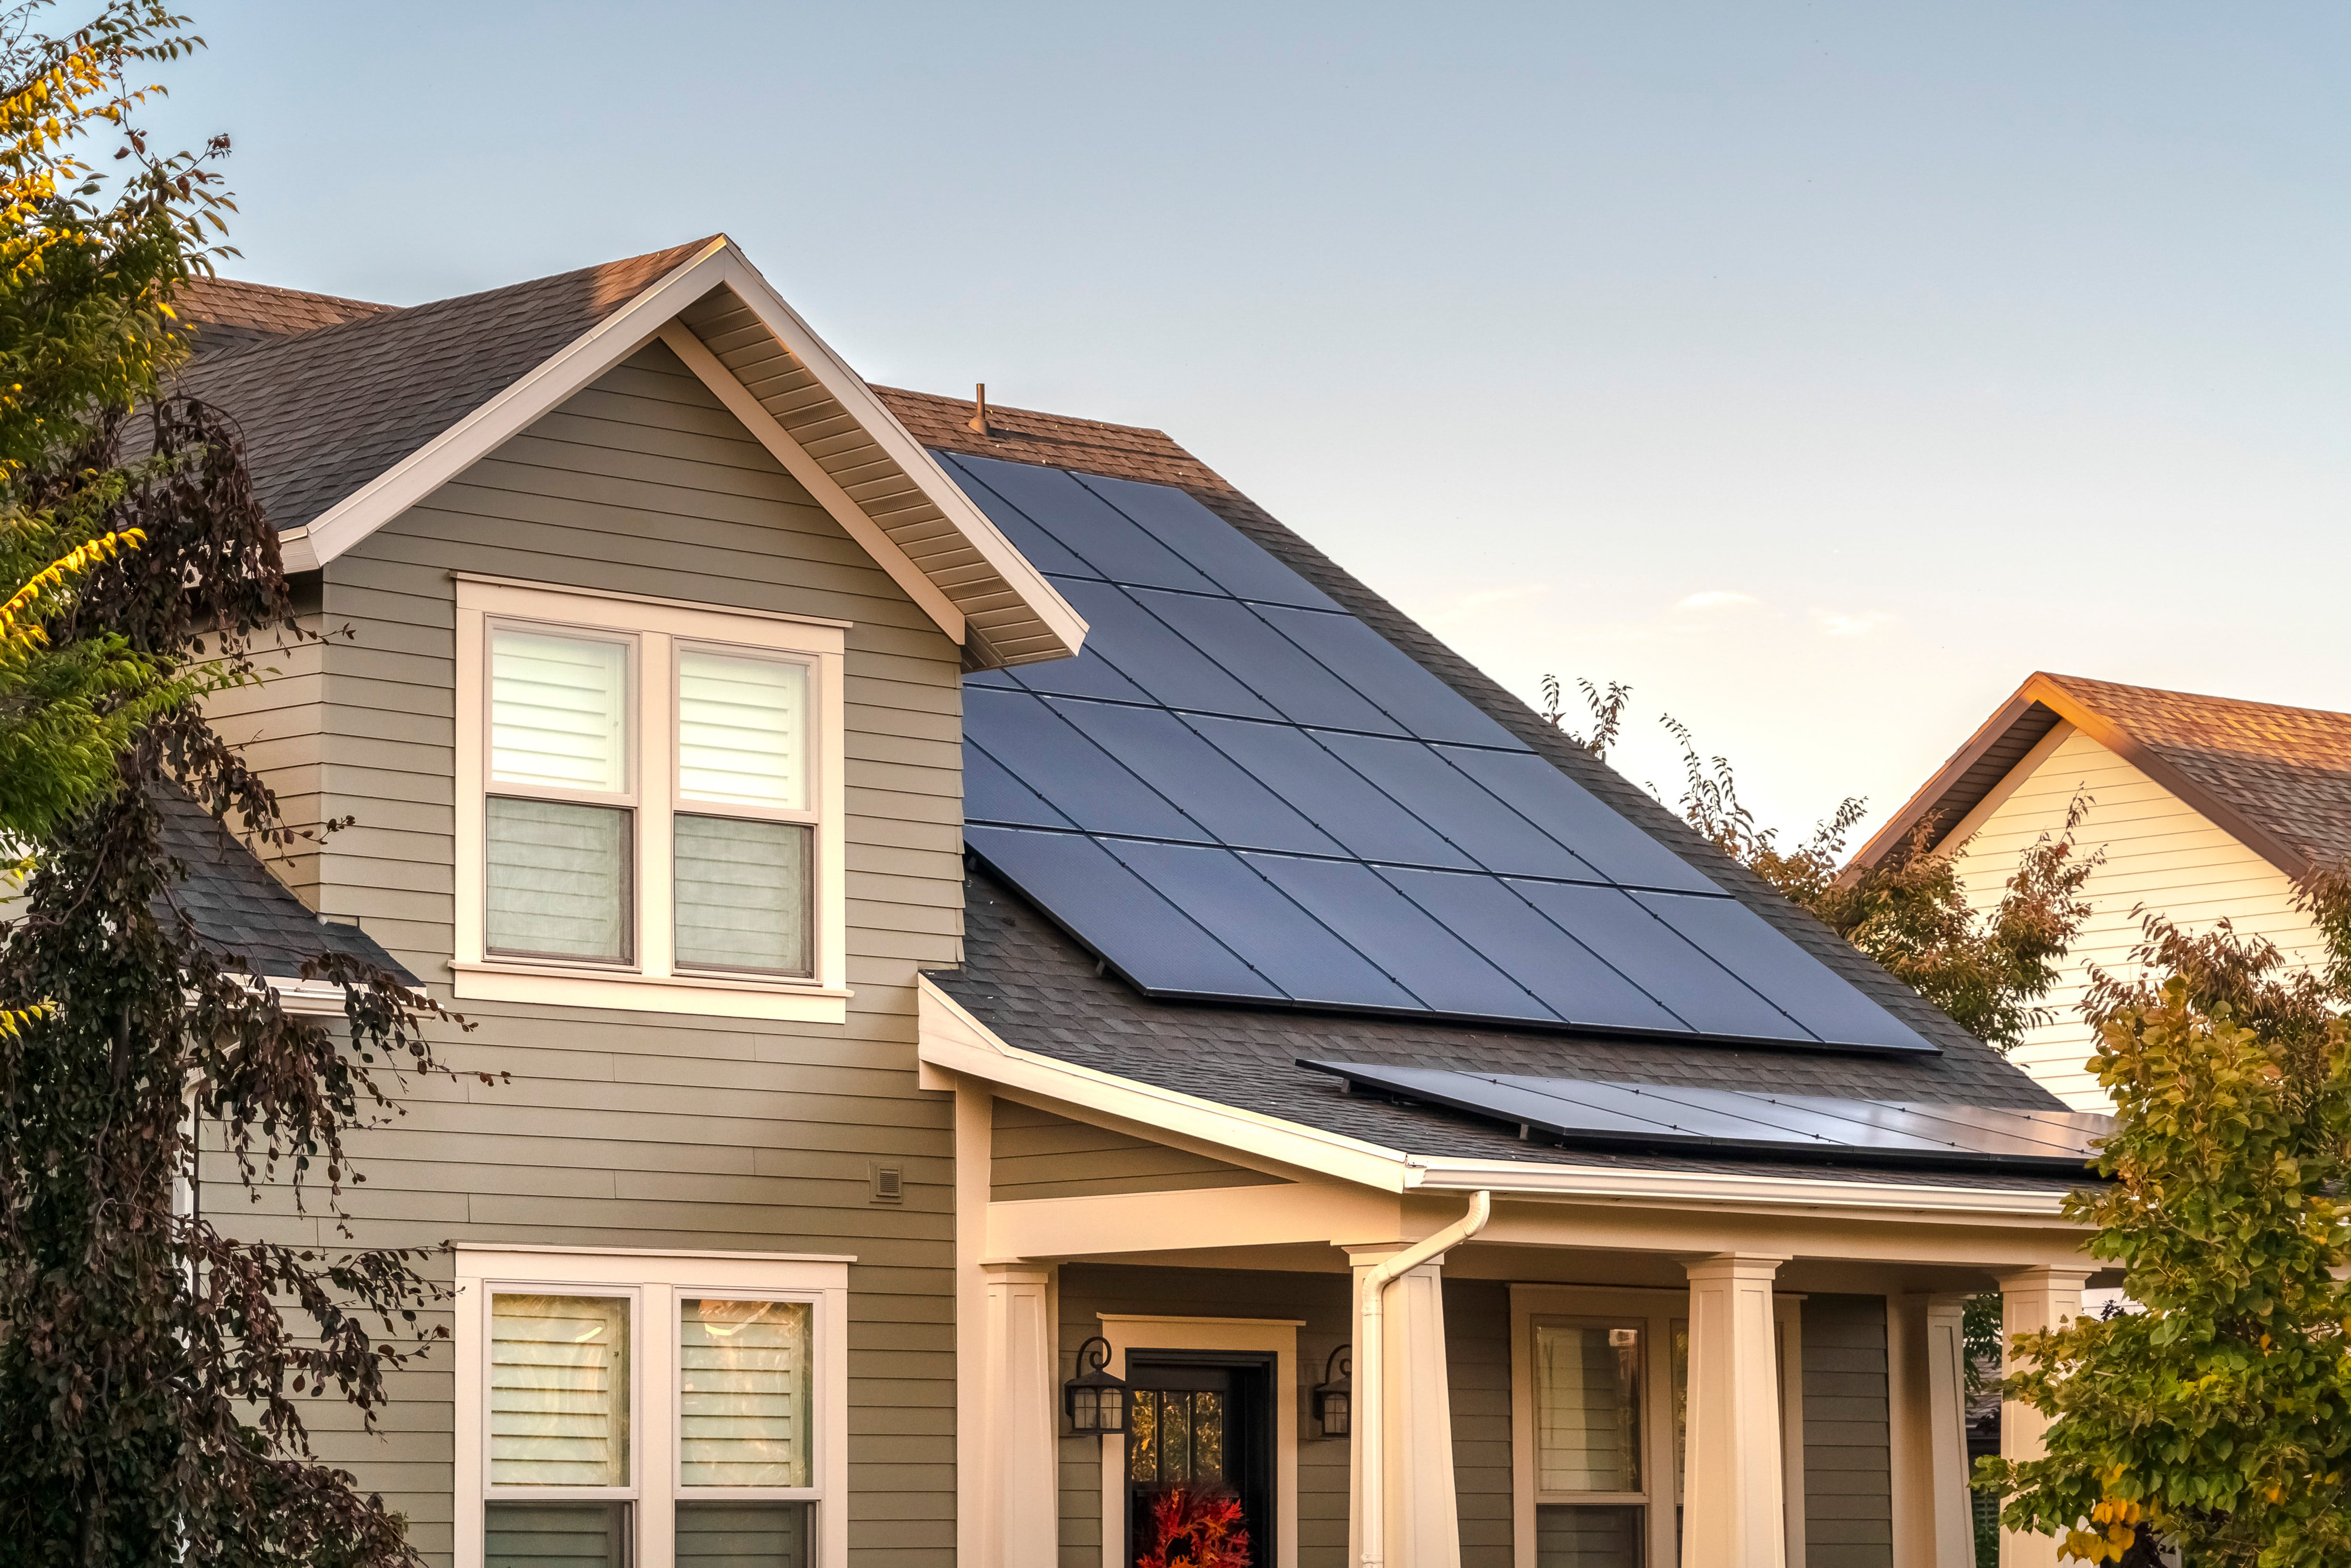 LEED certified home with solar panels